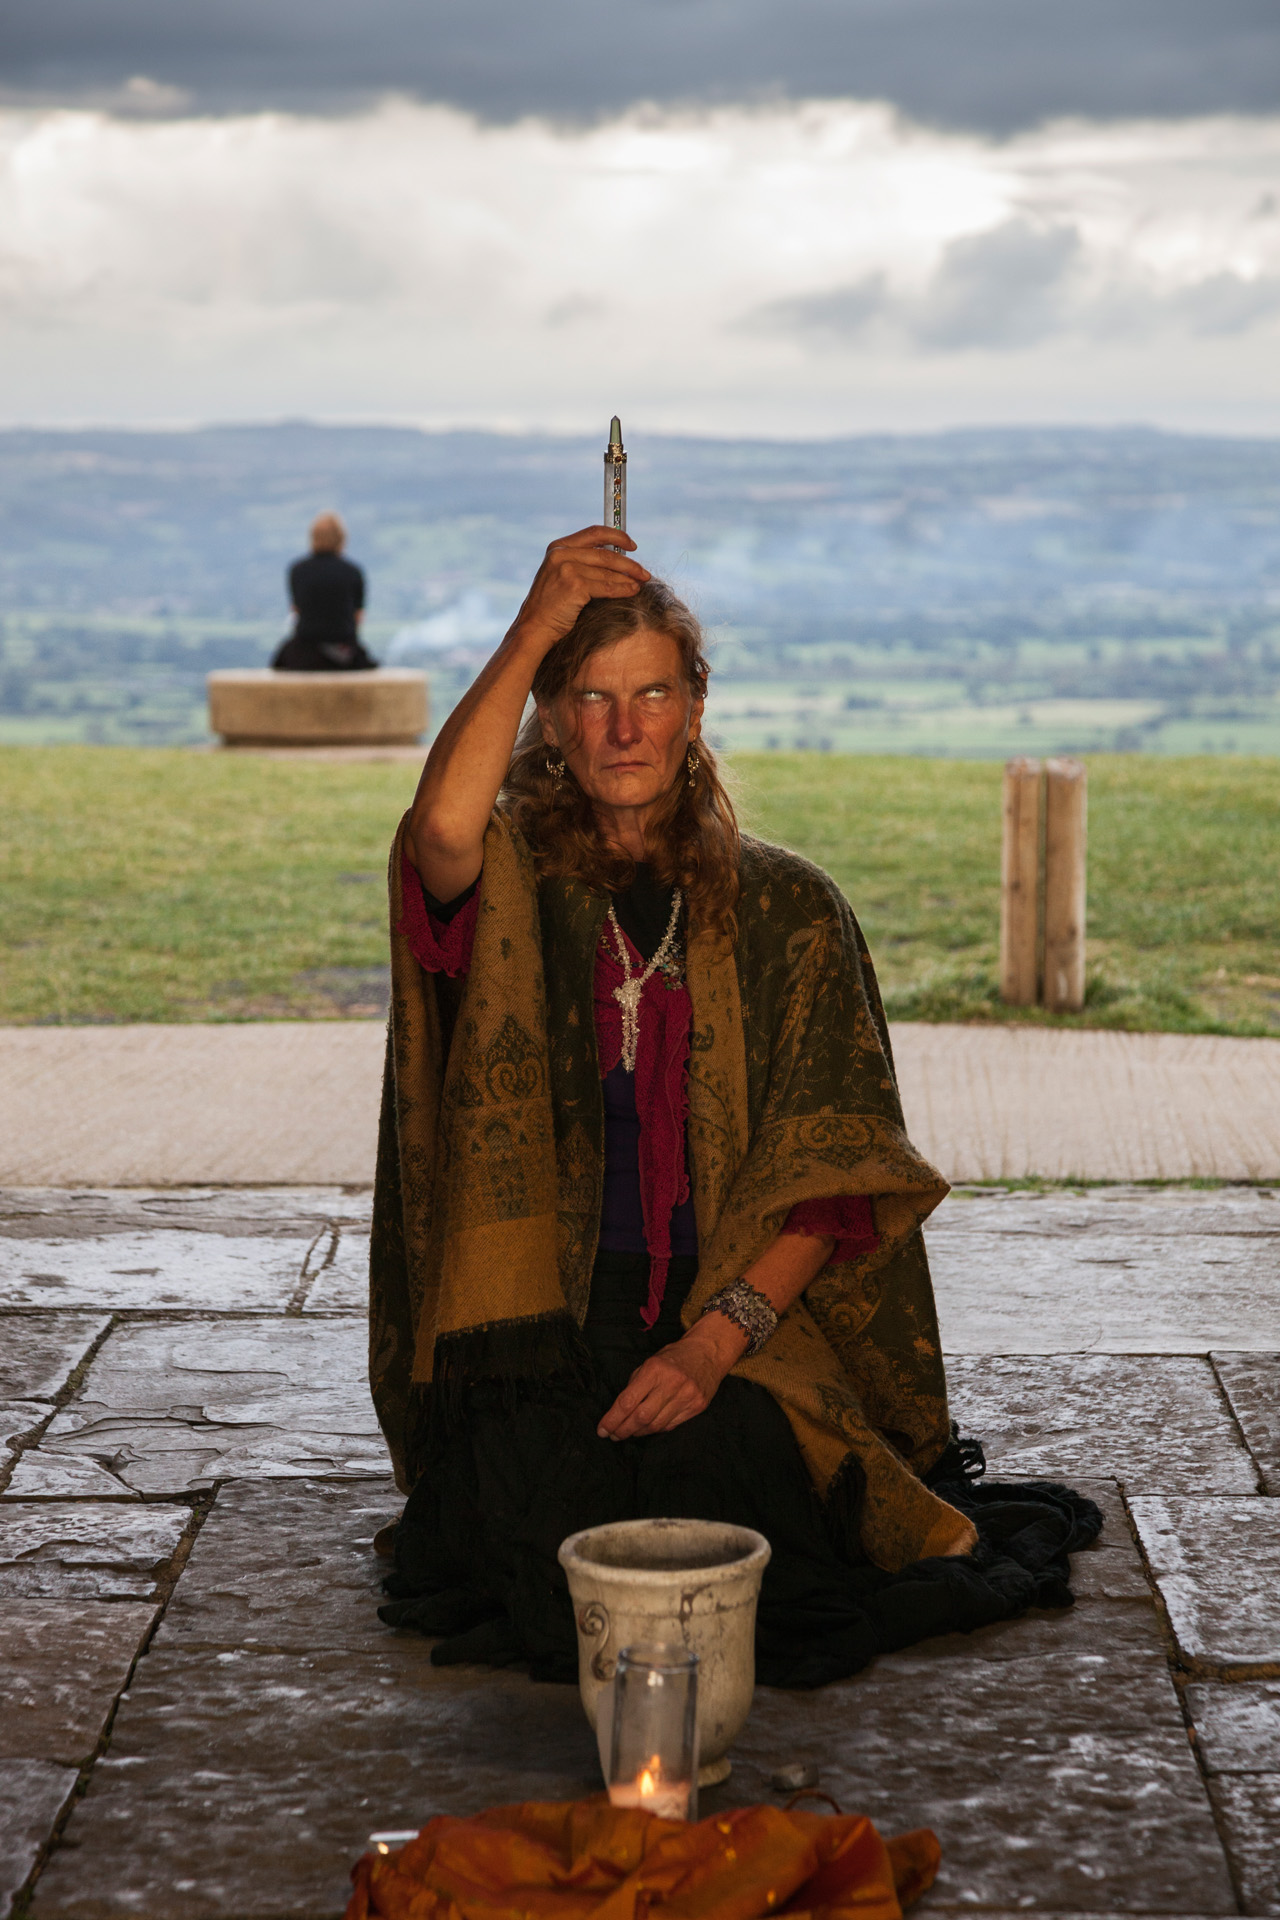  A woman performs a ritual inside the bell tower on Glastonbury Tor, believed to be the mythical entrance to Avalon, the land of fairies. For centuries, people in Glastonbury believe the legendary island of Avalon to be the final refuge for the wound